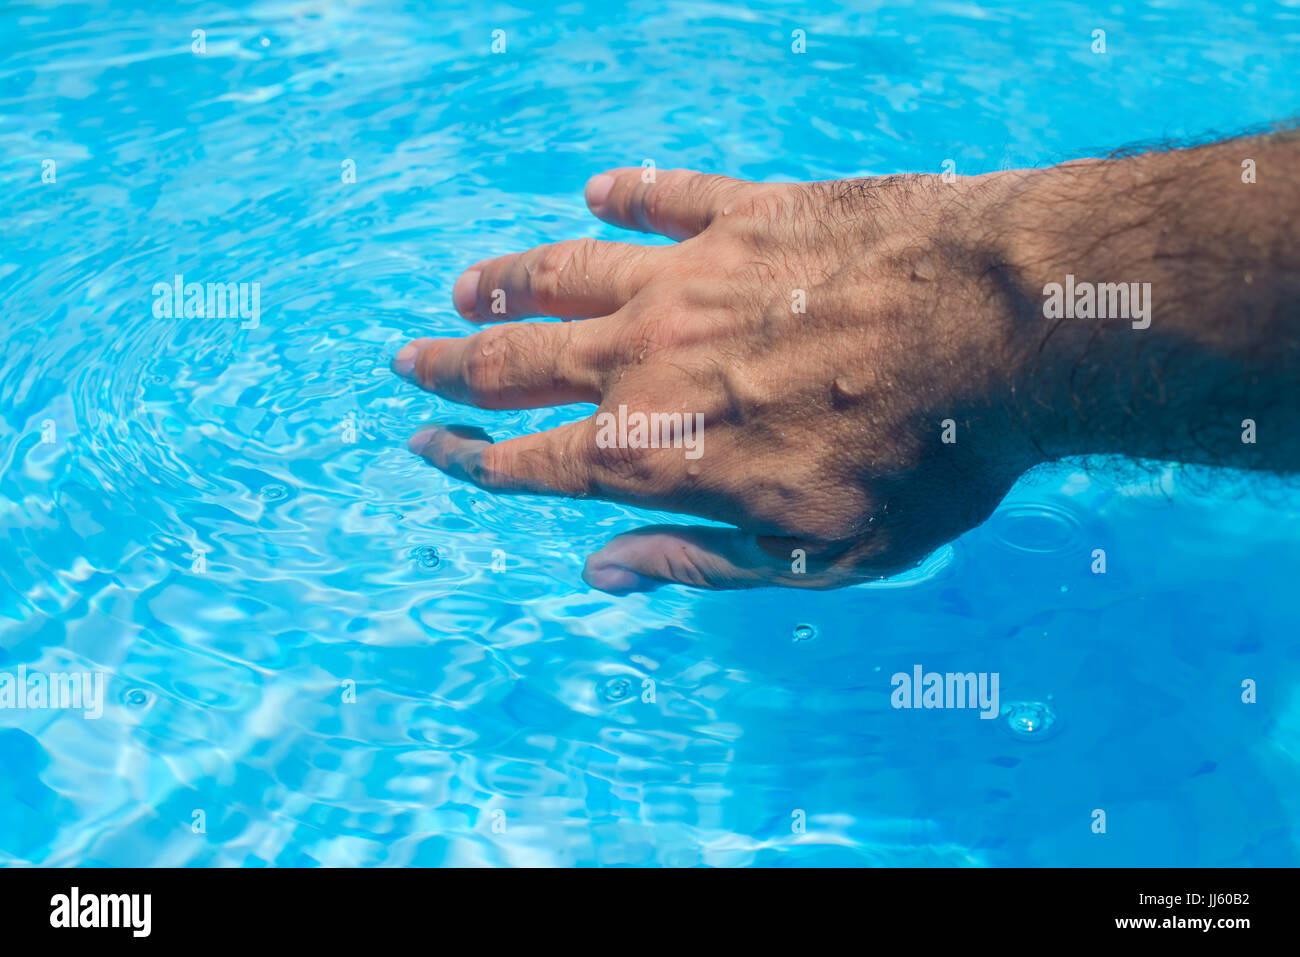 Male hand touching clear swimming pool water, summer activity by the poolside Stock Photo